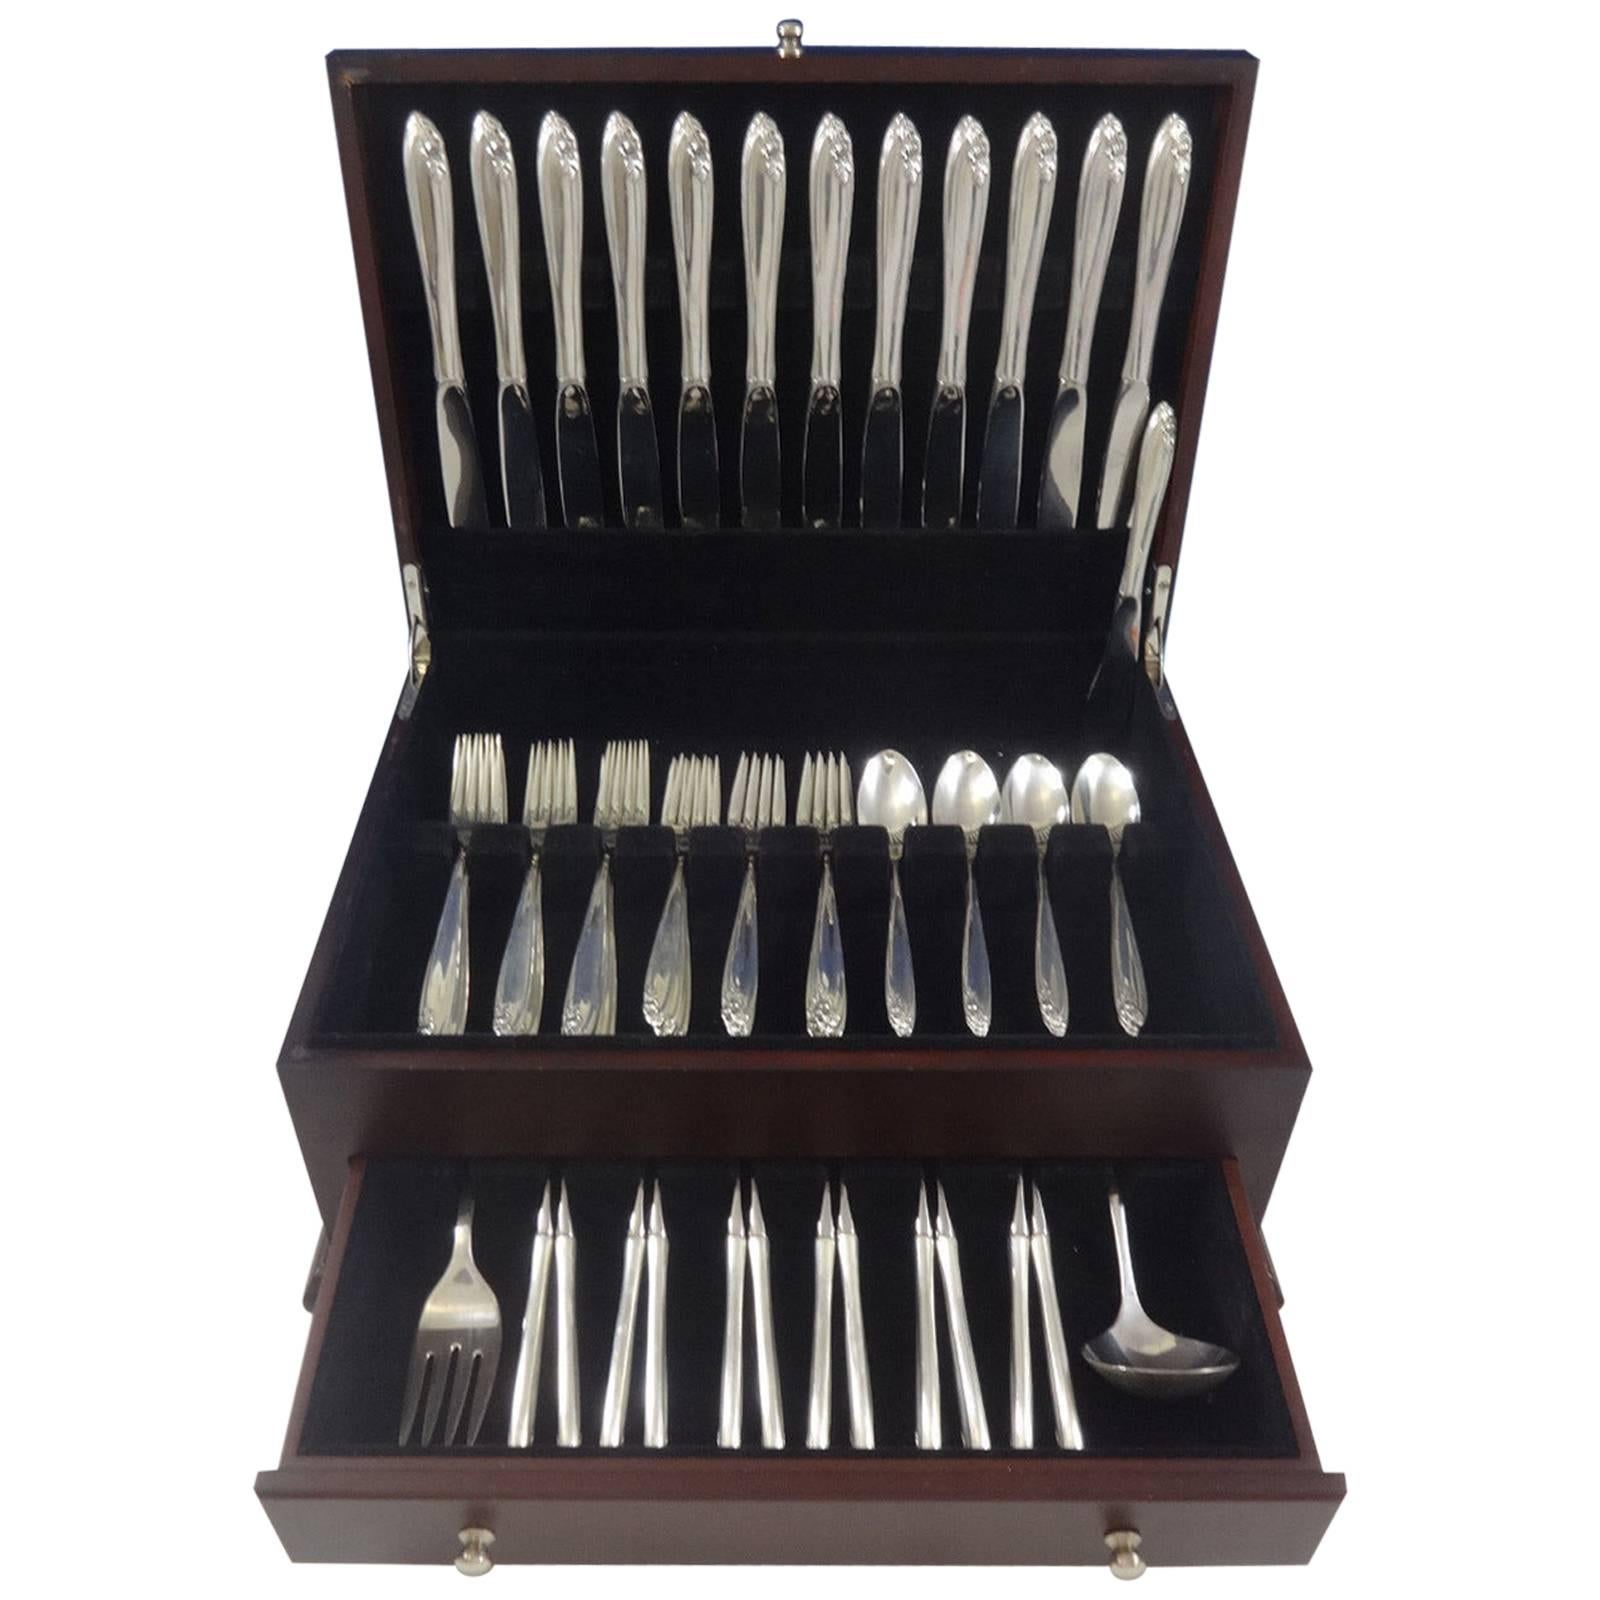 Lovely Debutante by Wallace sterling silver flatware set of 63 pieces. This set includes:

12 knives, 9 3/8